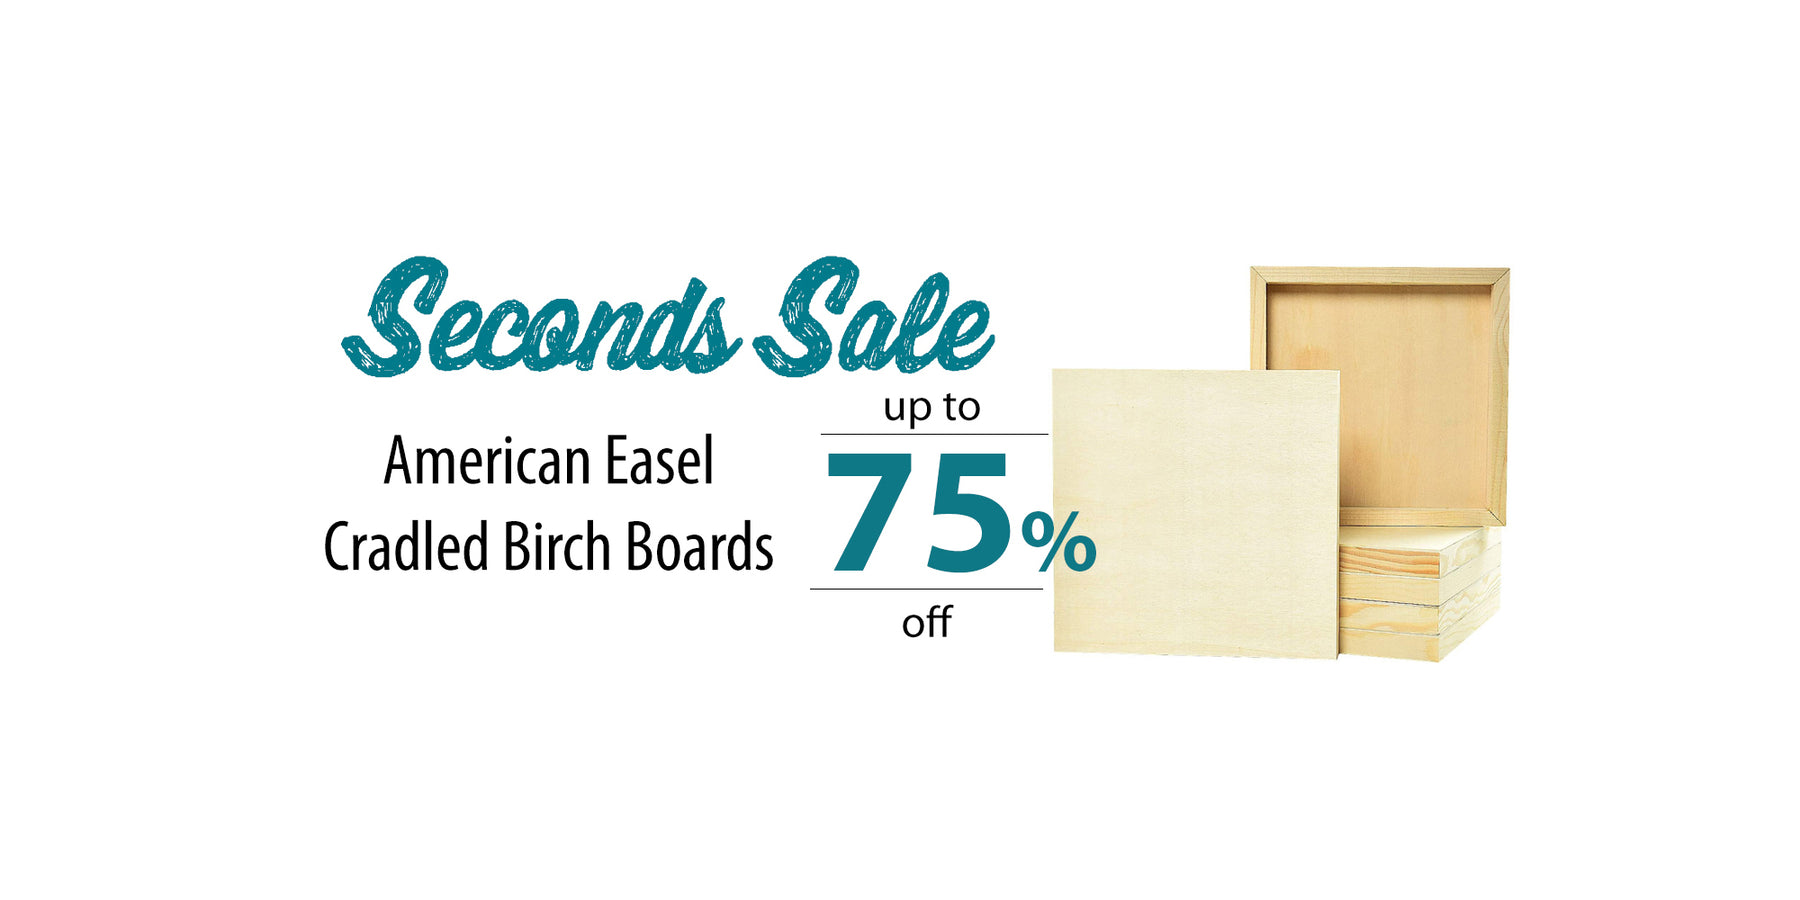 American Easel Cradled Birch Board Sale text save up to 75% off